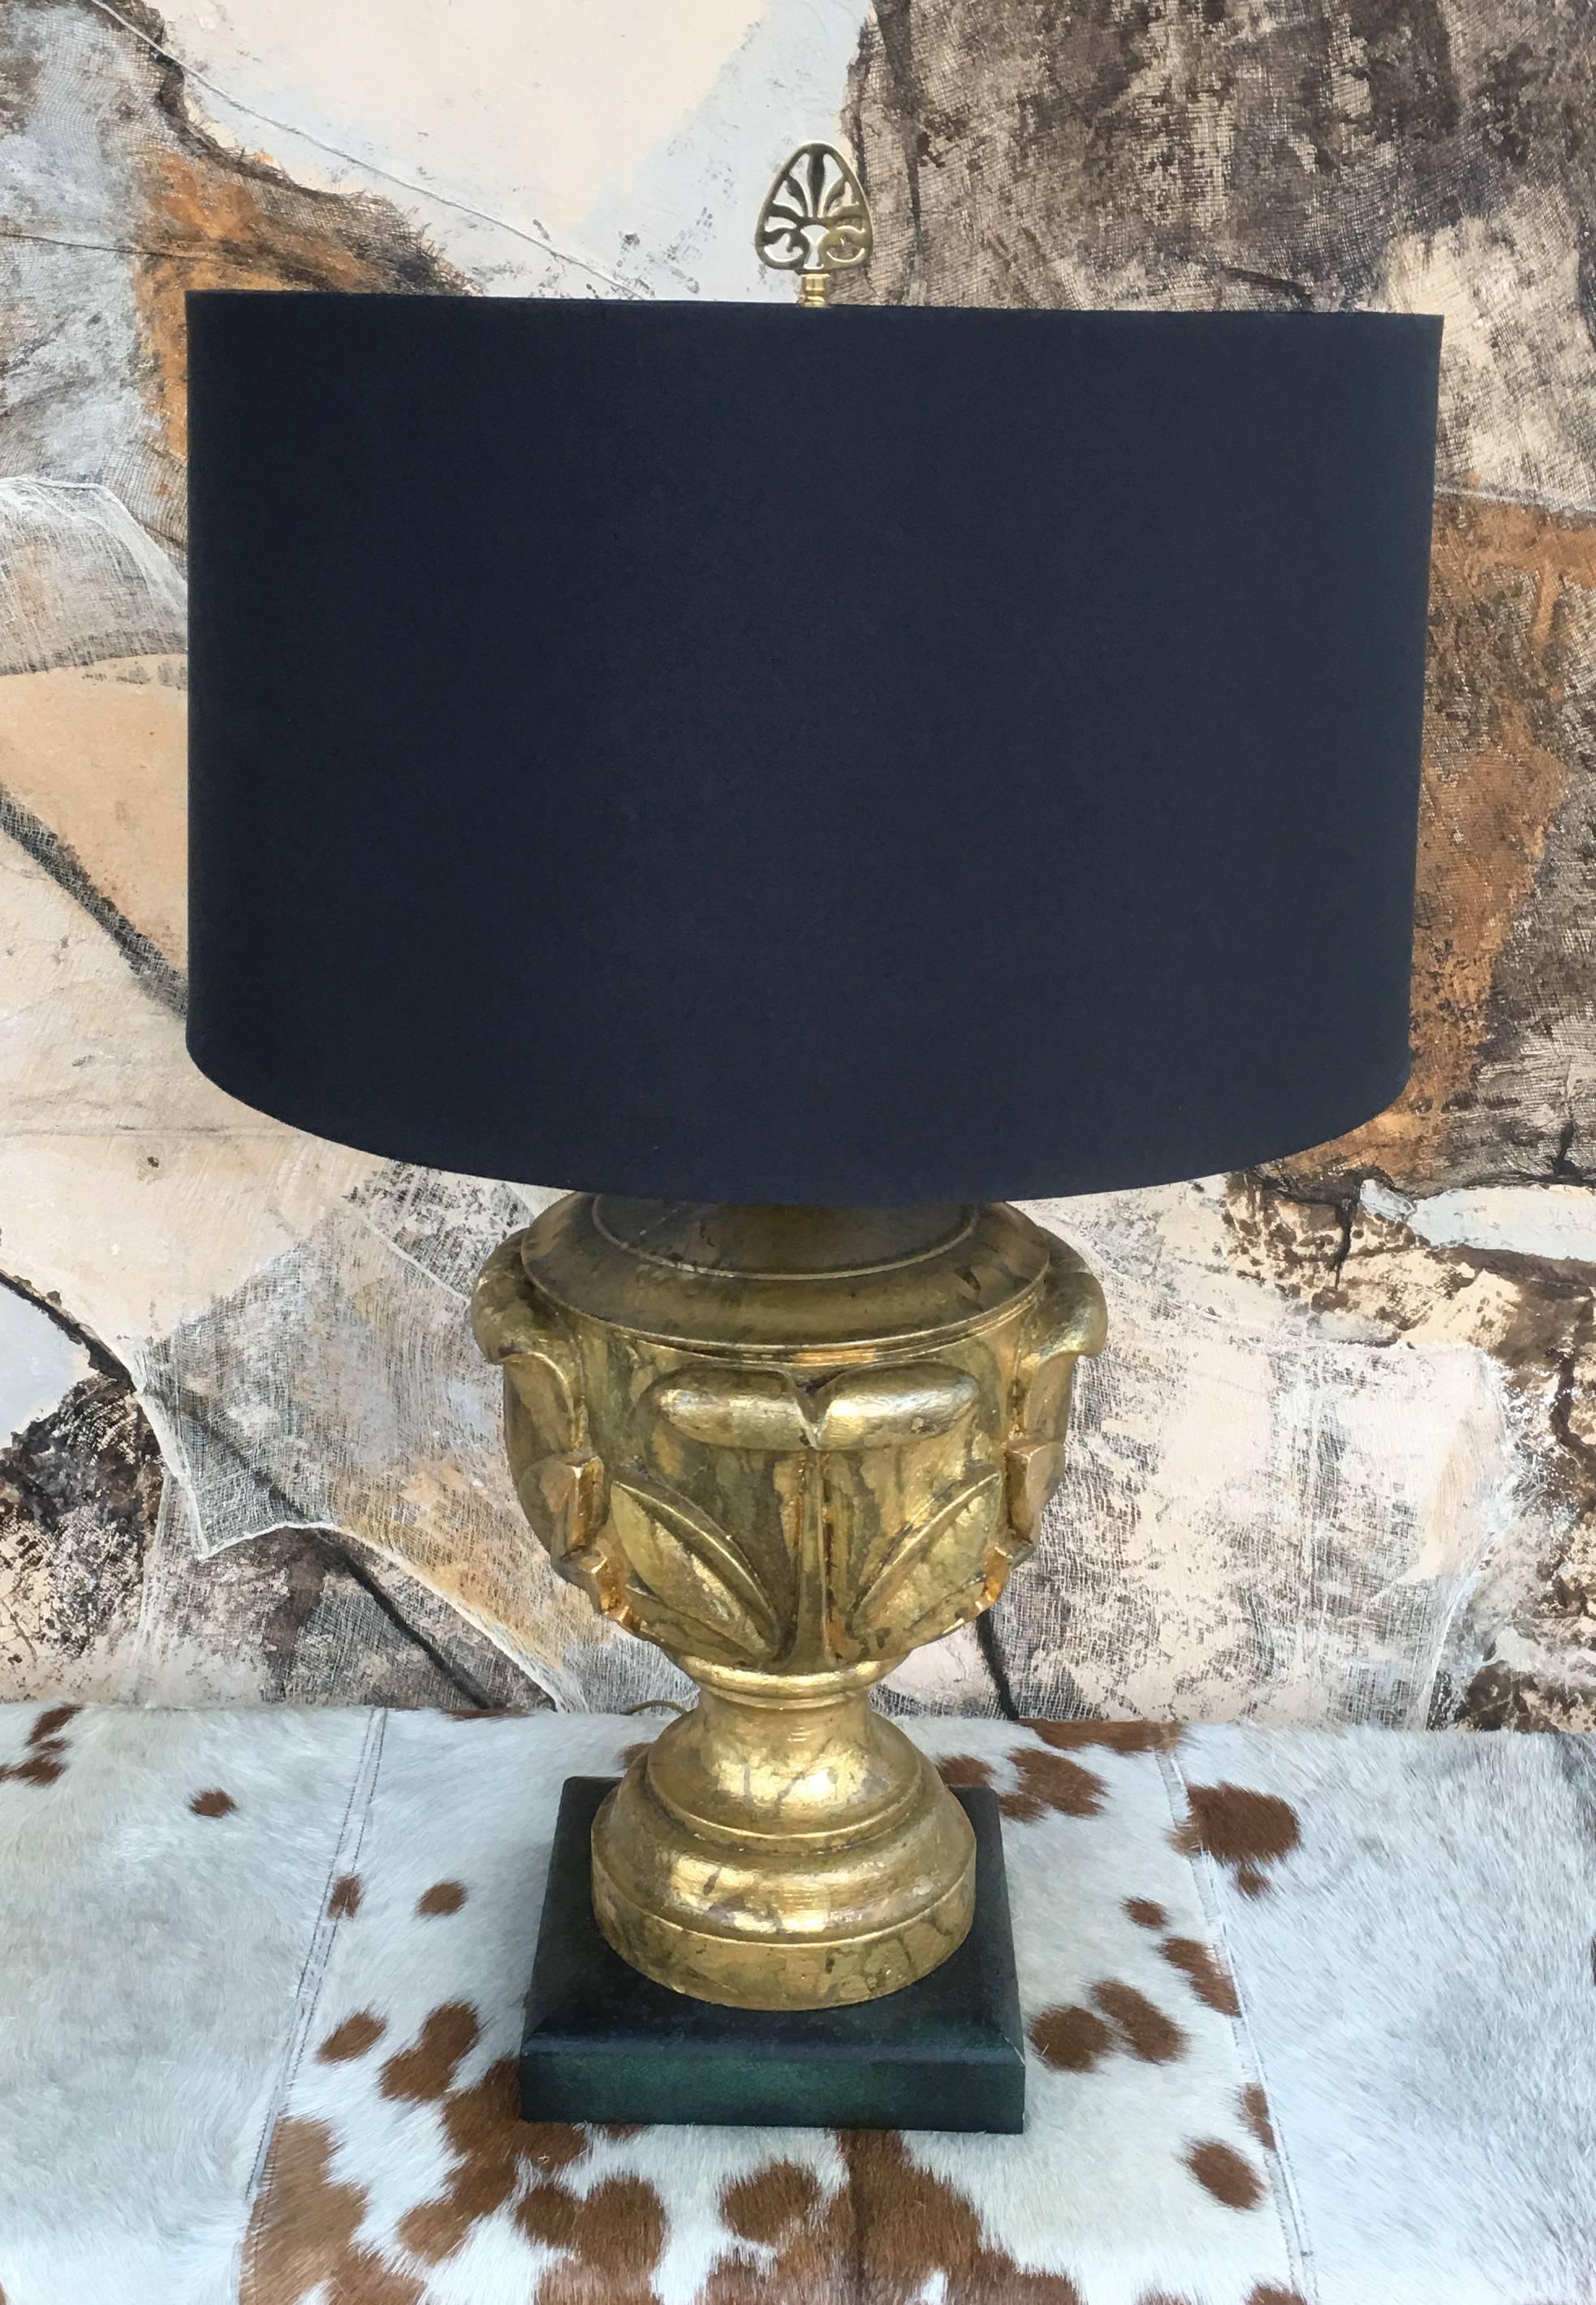 An extremely chic lamp from a very upscale home in Palm Springs, CA done entirely in high end Hollywood Regency. The lamp is a combination of brass, Hand gold leafed wood and faux finish base. The original shade is perfect form and color to